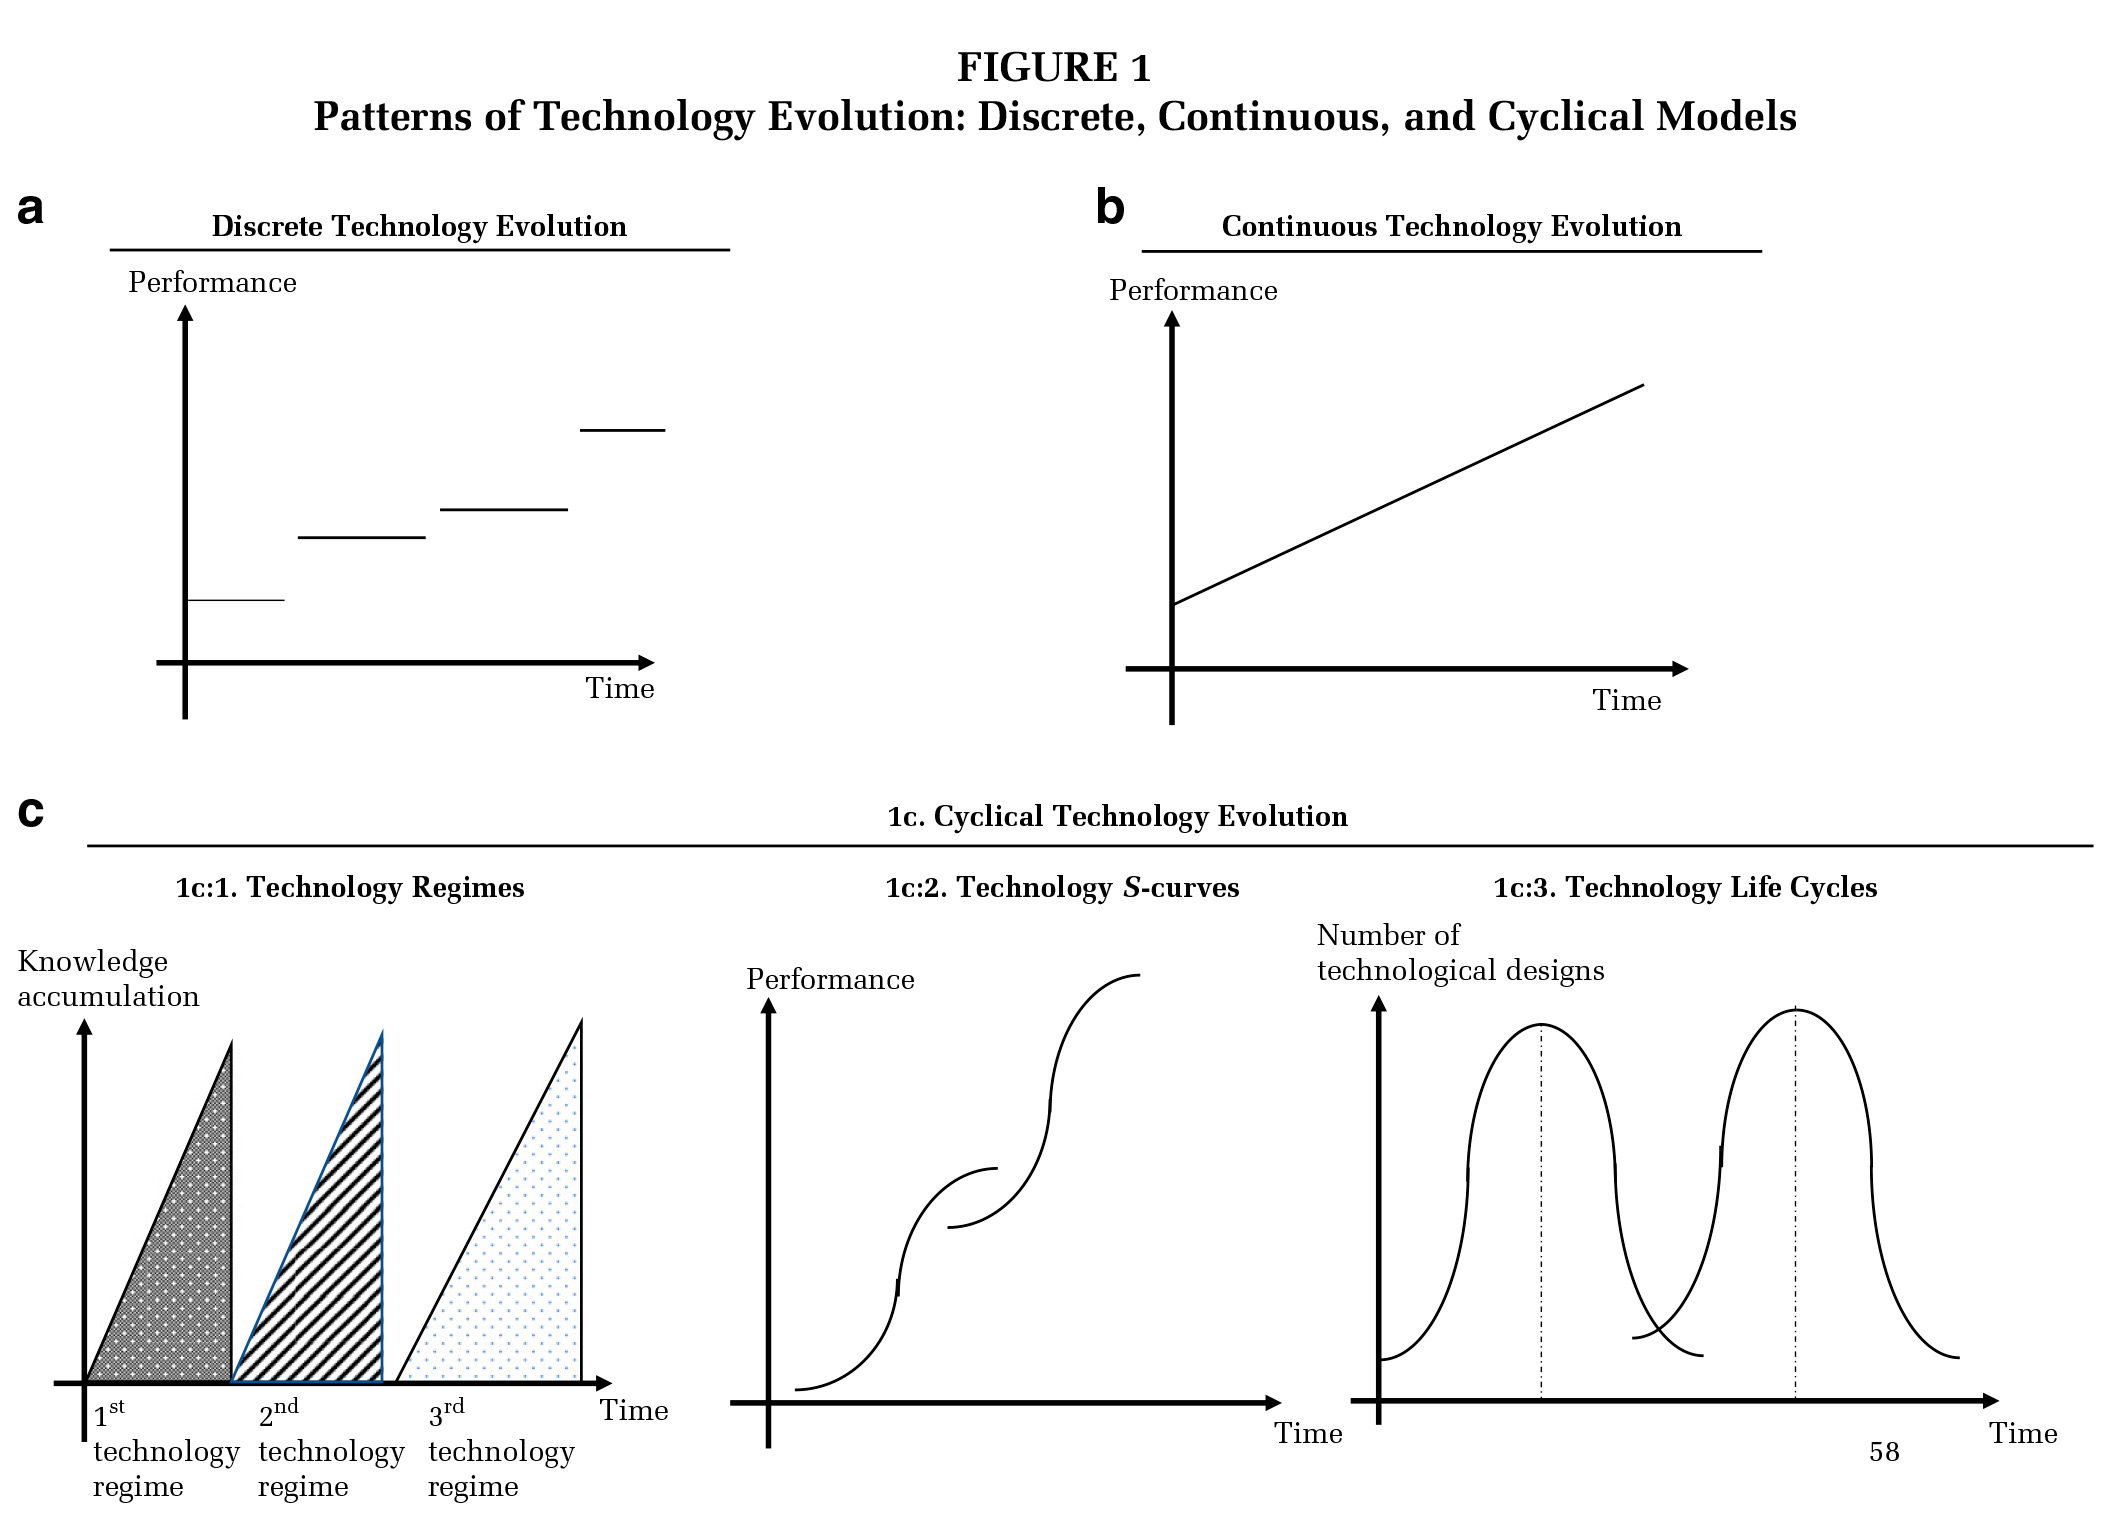 Patterns of Technology Evolution (from research paper)